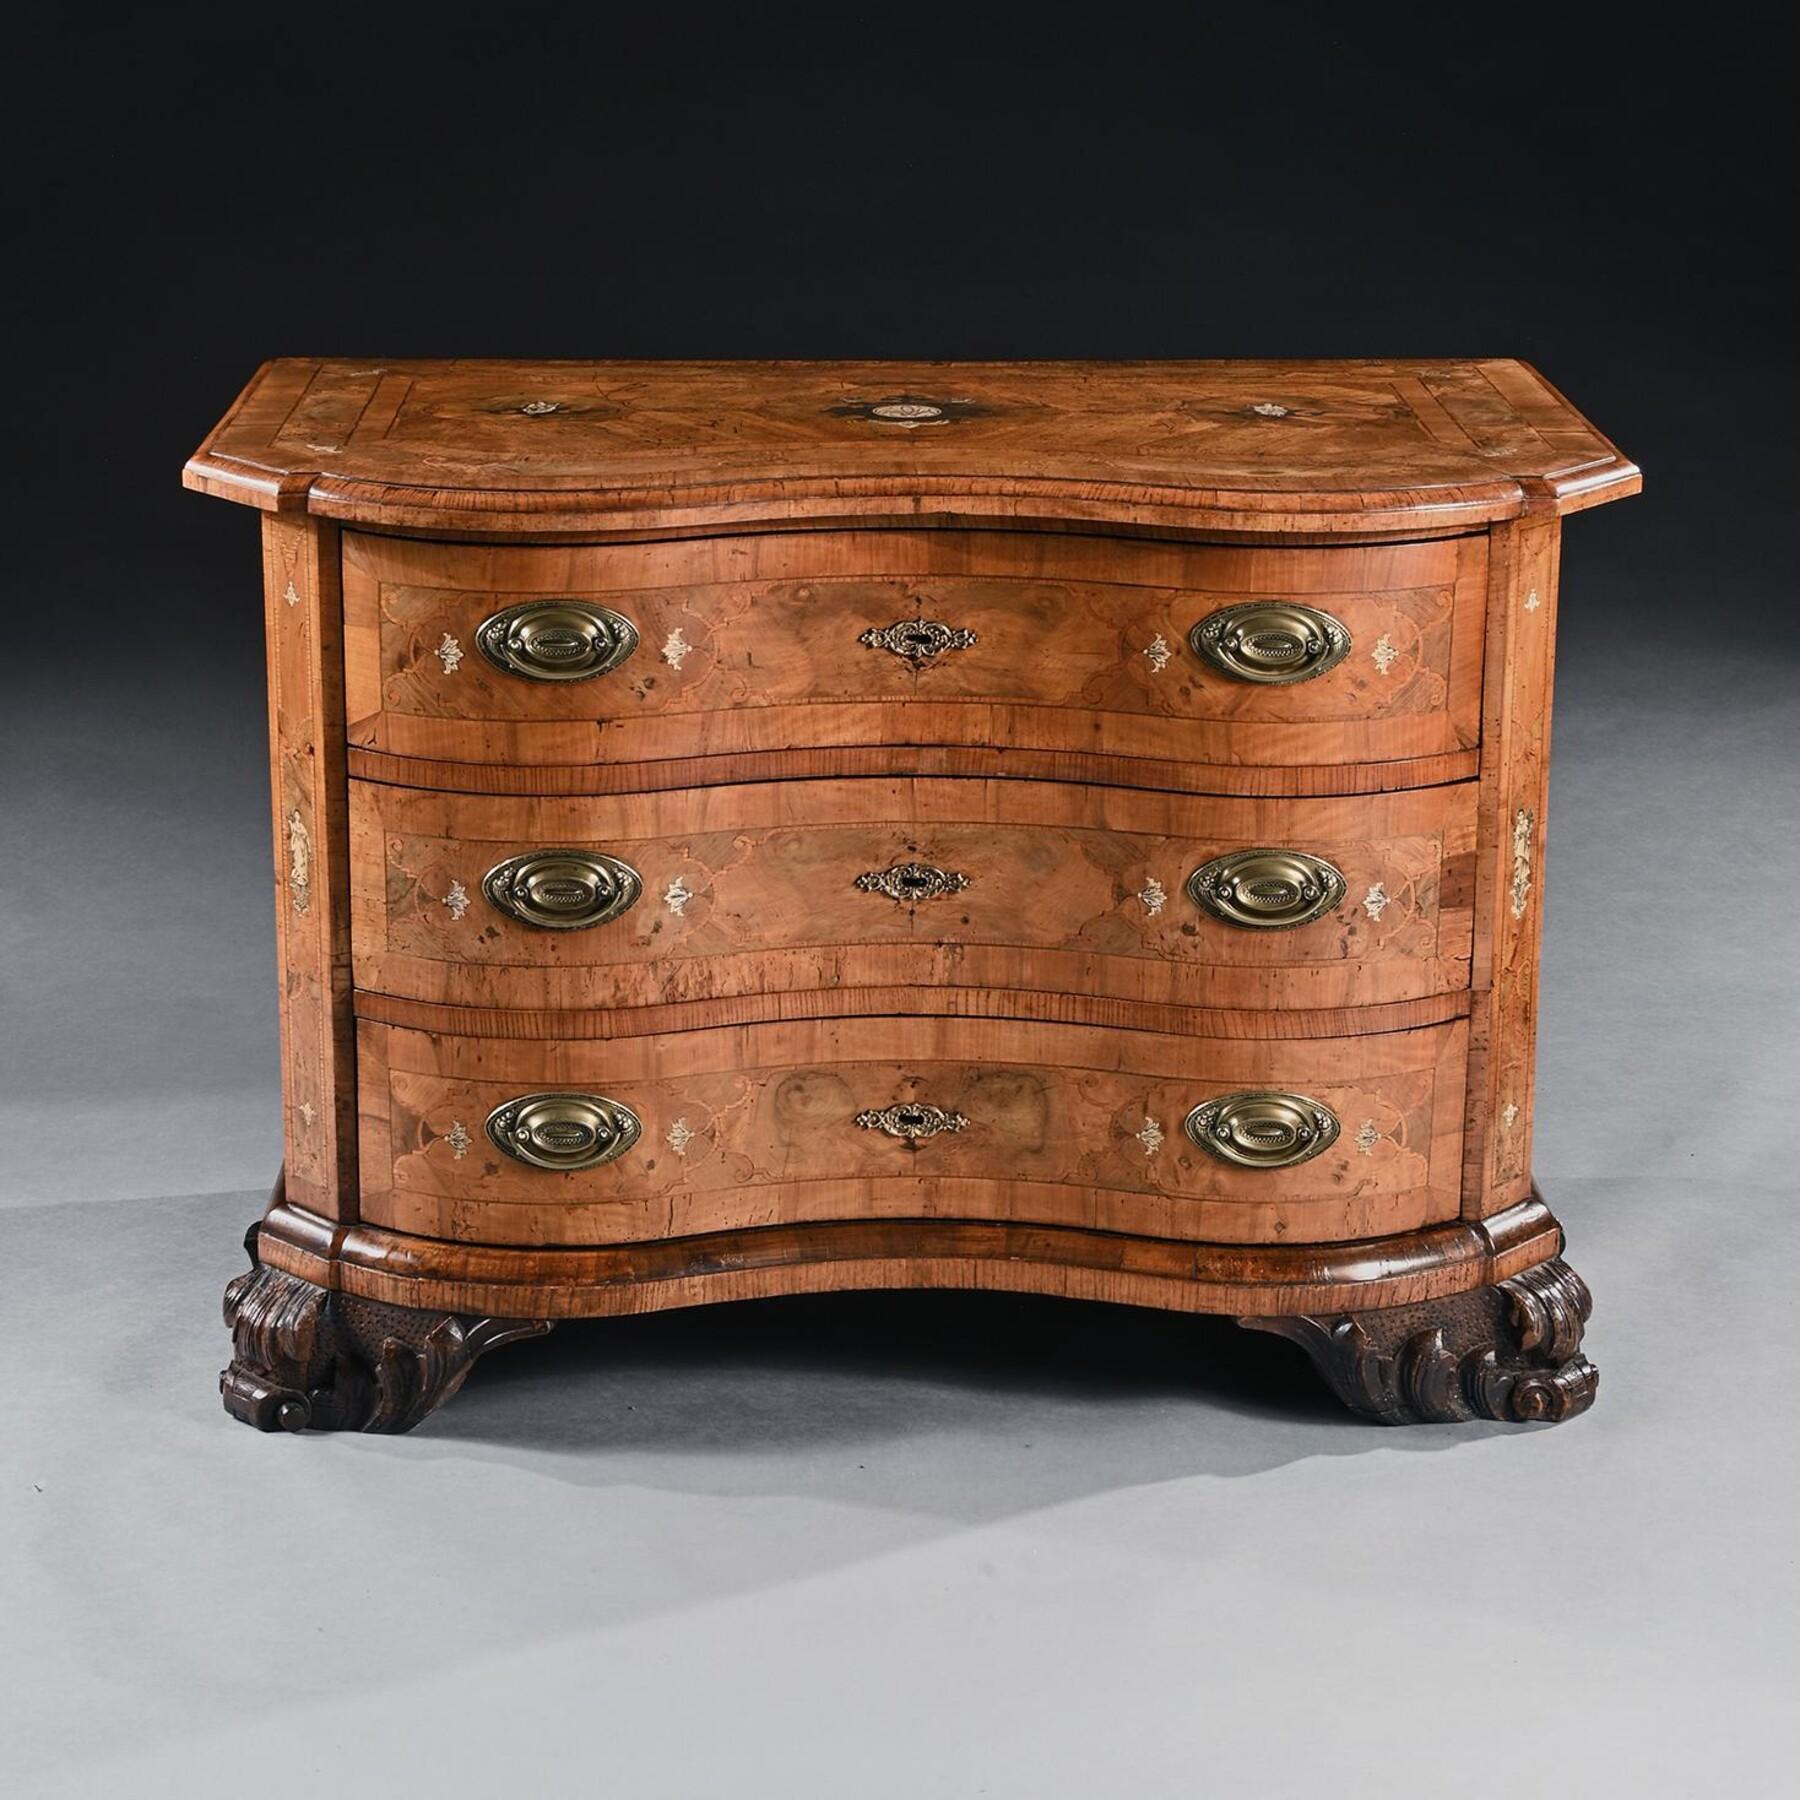 A Fine 18th Century German Walnut shaped oxbow-fronted Commode inlaid with Ivory and Pewter 

German - Probably made in Braunschweig Circa 1740

A masterful example of a fine 18th century German commode with marquetry and parquetry combining burr,